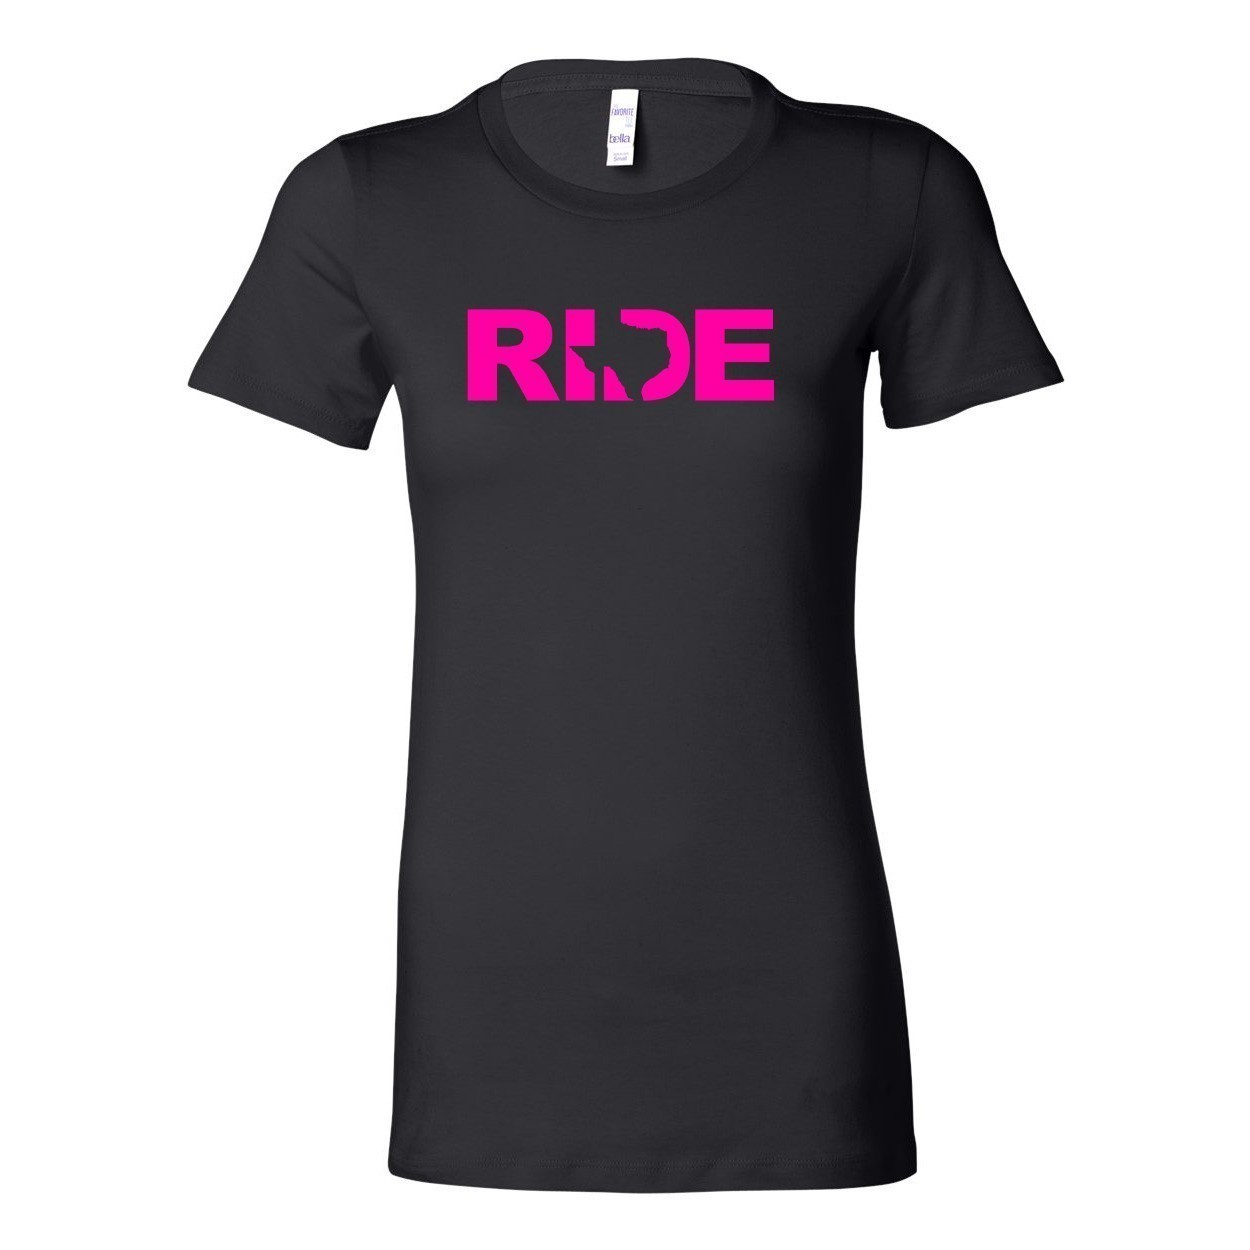 Ride Texas Women's Classic Fitted Tri-Blend T-Shirt Black (Pink Logo)